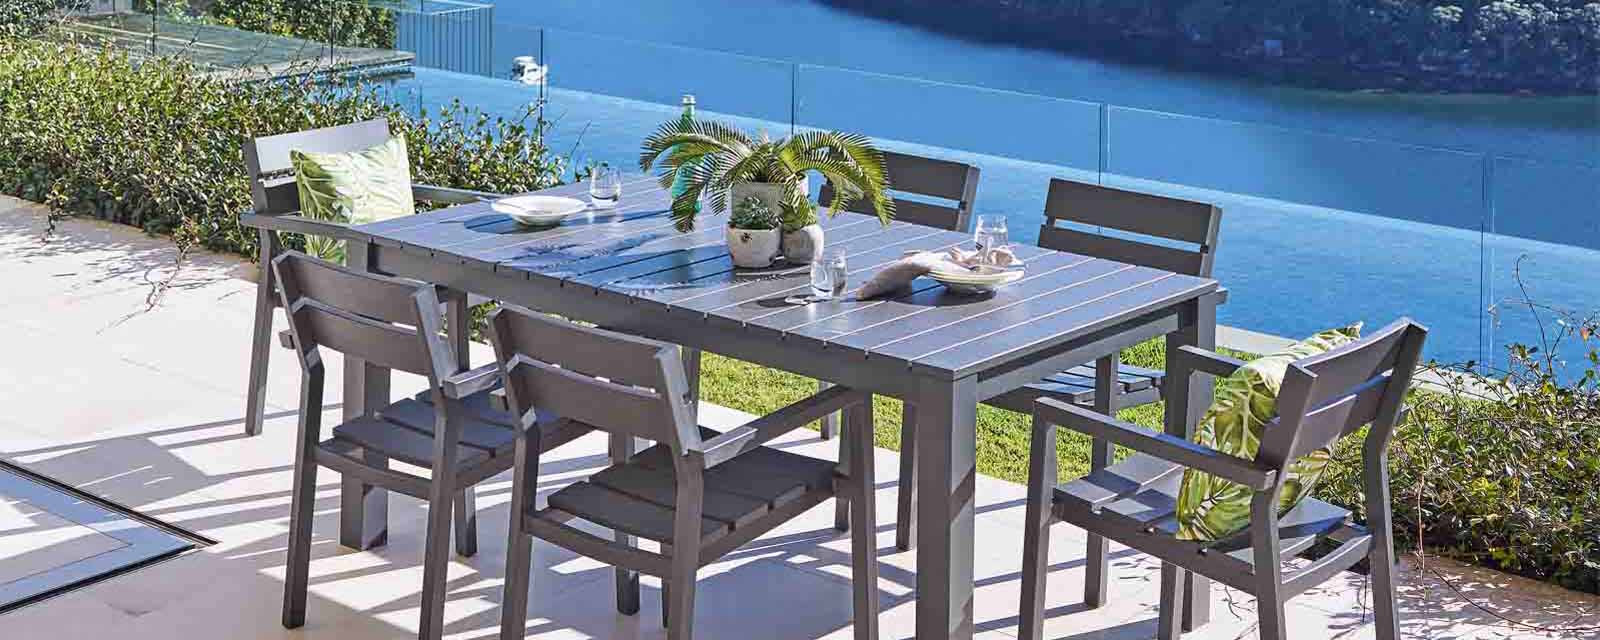 Outdoor Furniture And Bbqs That Are Perfect For Spring